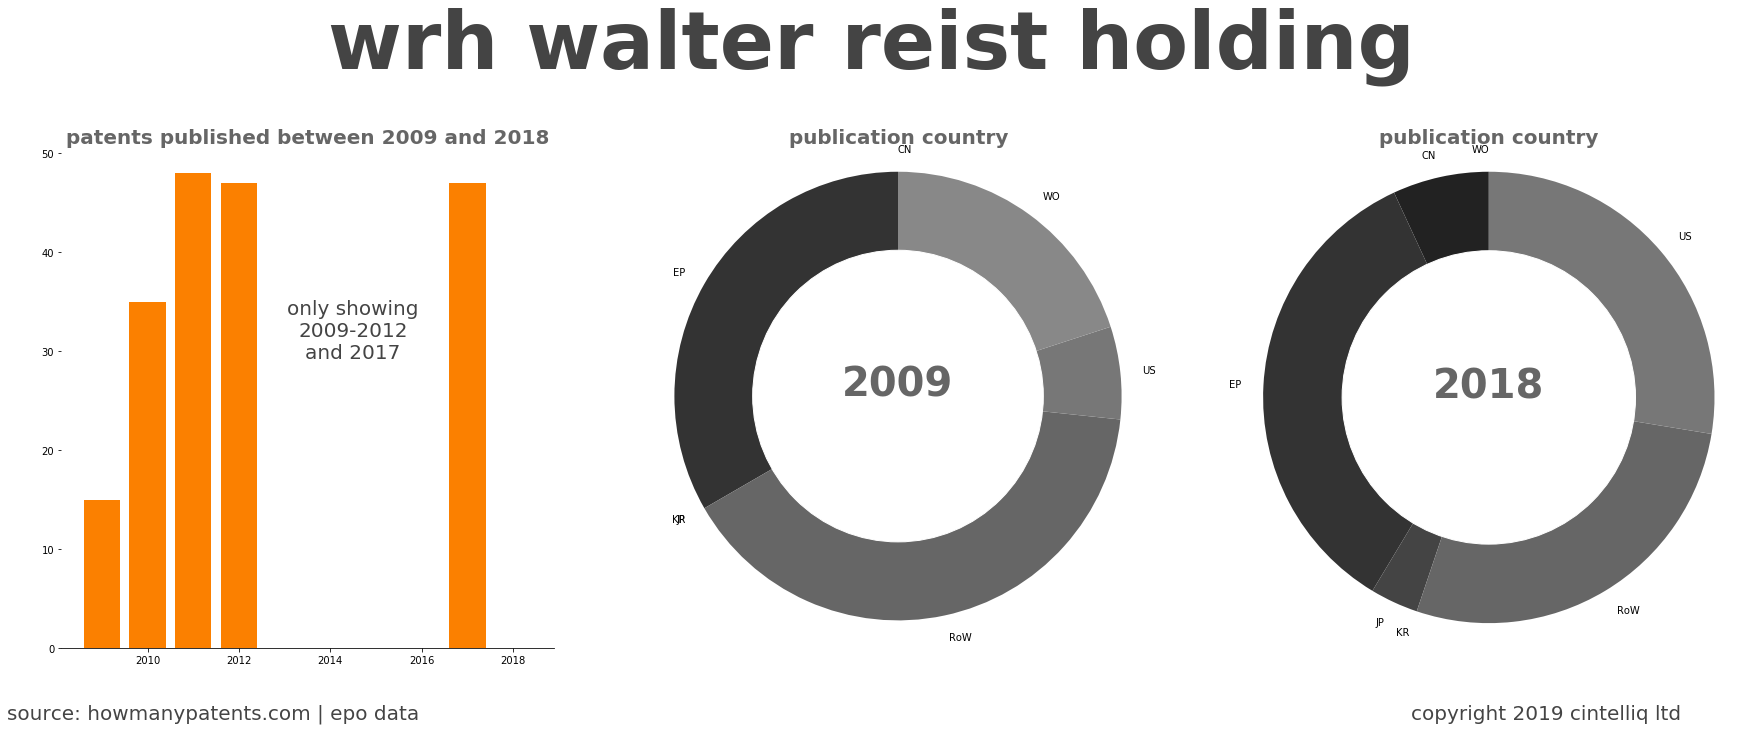 summary of patents for Wrh Walter Reist Holding